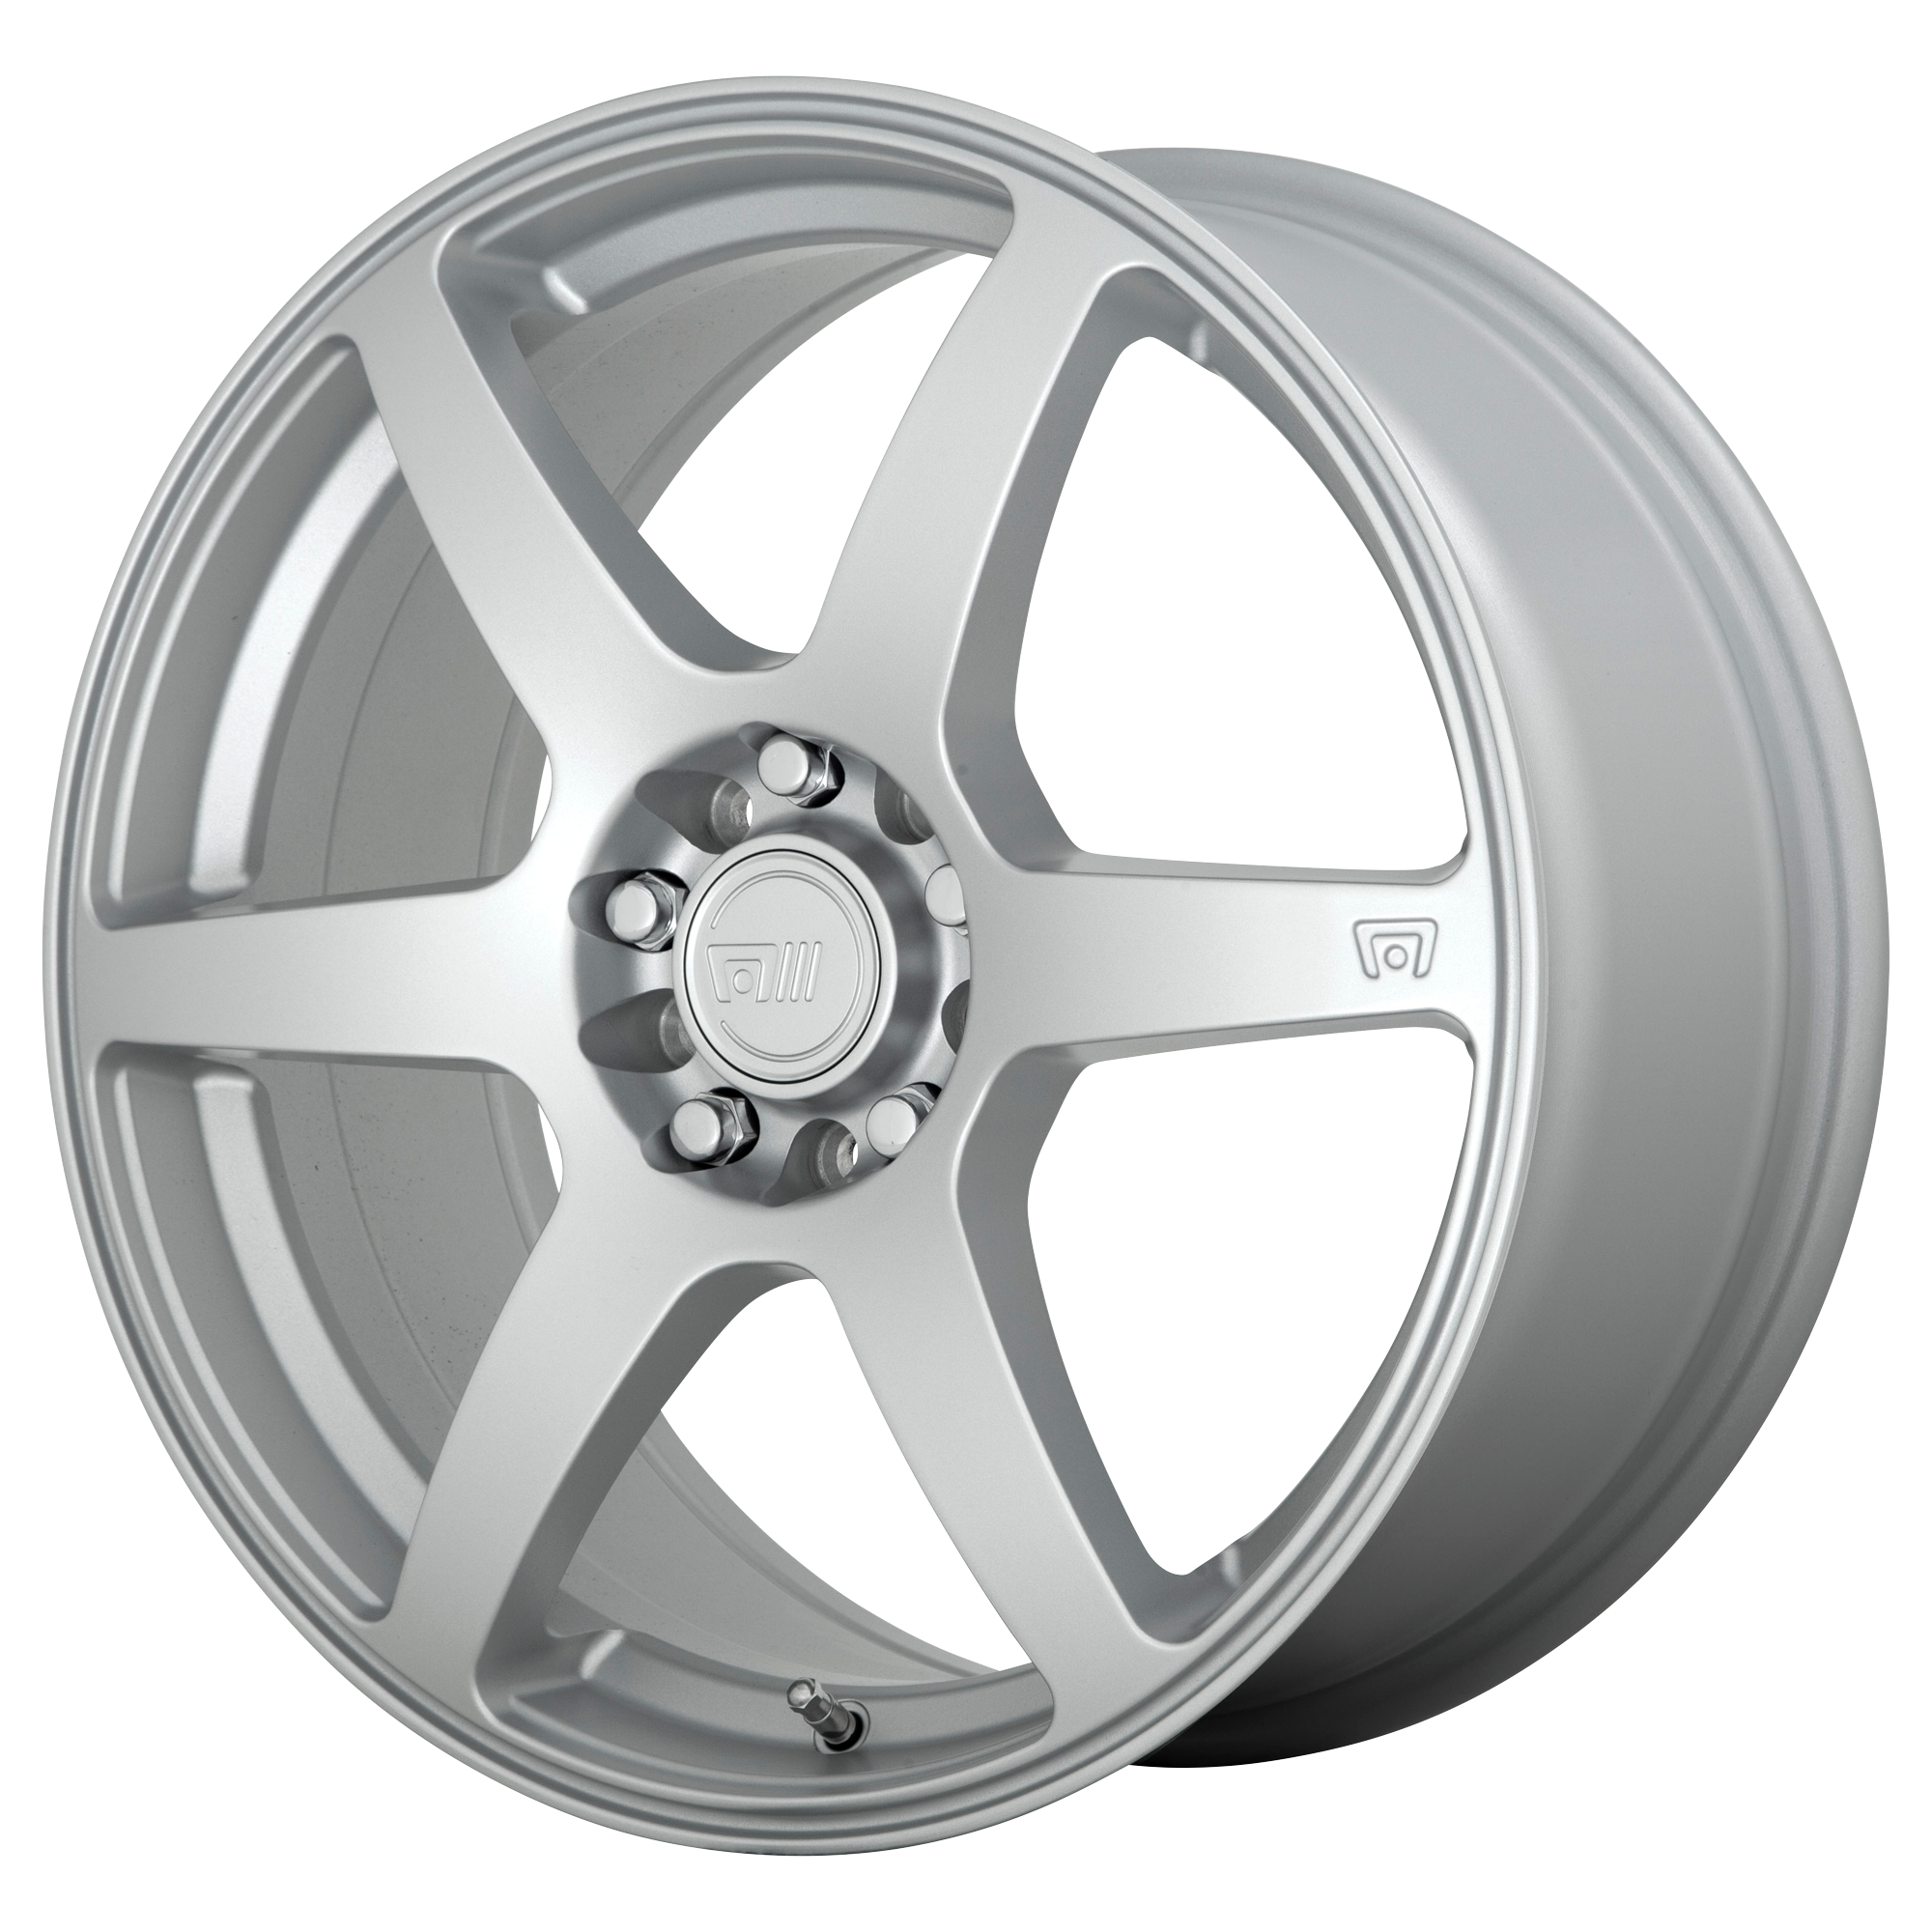 CS6 16x7 4x100.00/4x114.30 HYPER SILVER (40 mm) - Tires and Engine Performance